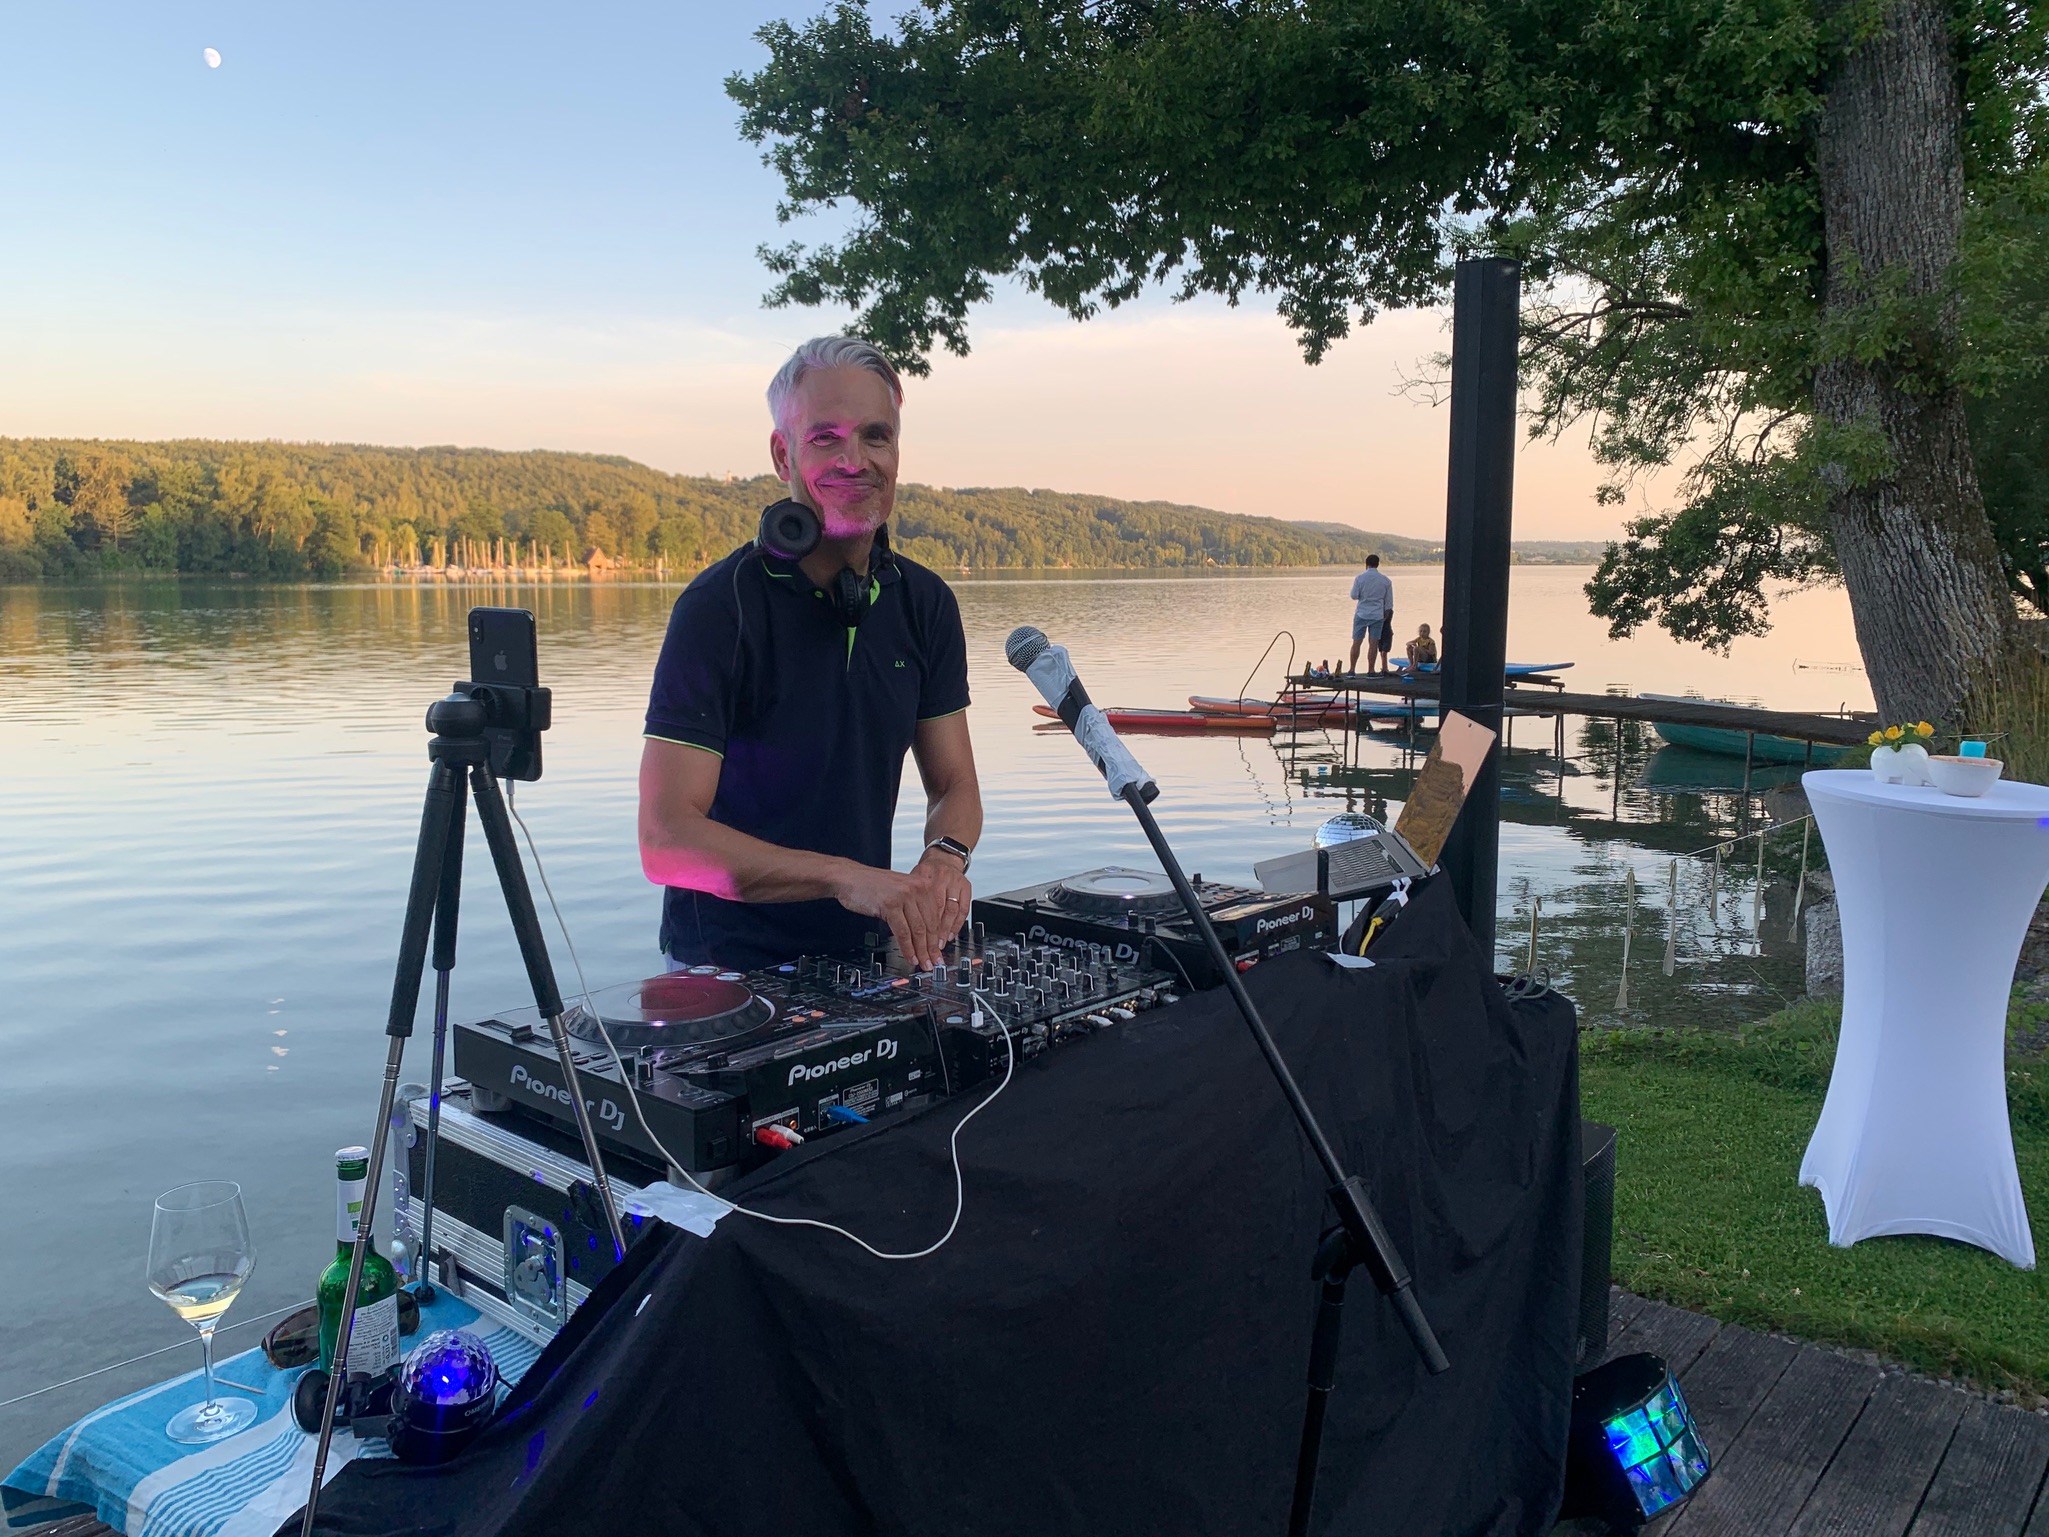 FRIDAY'SGROOVE on Tour / Impression vom Clubbing am See